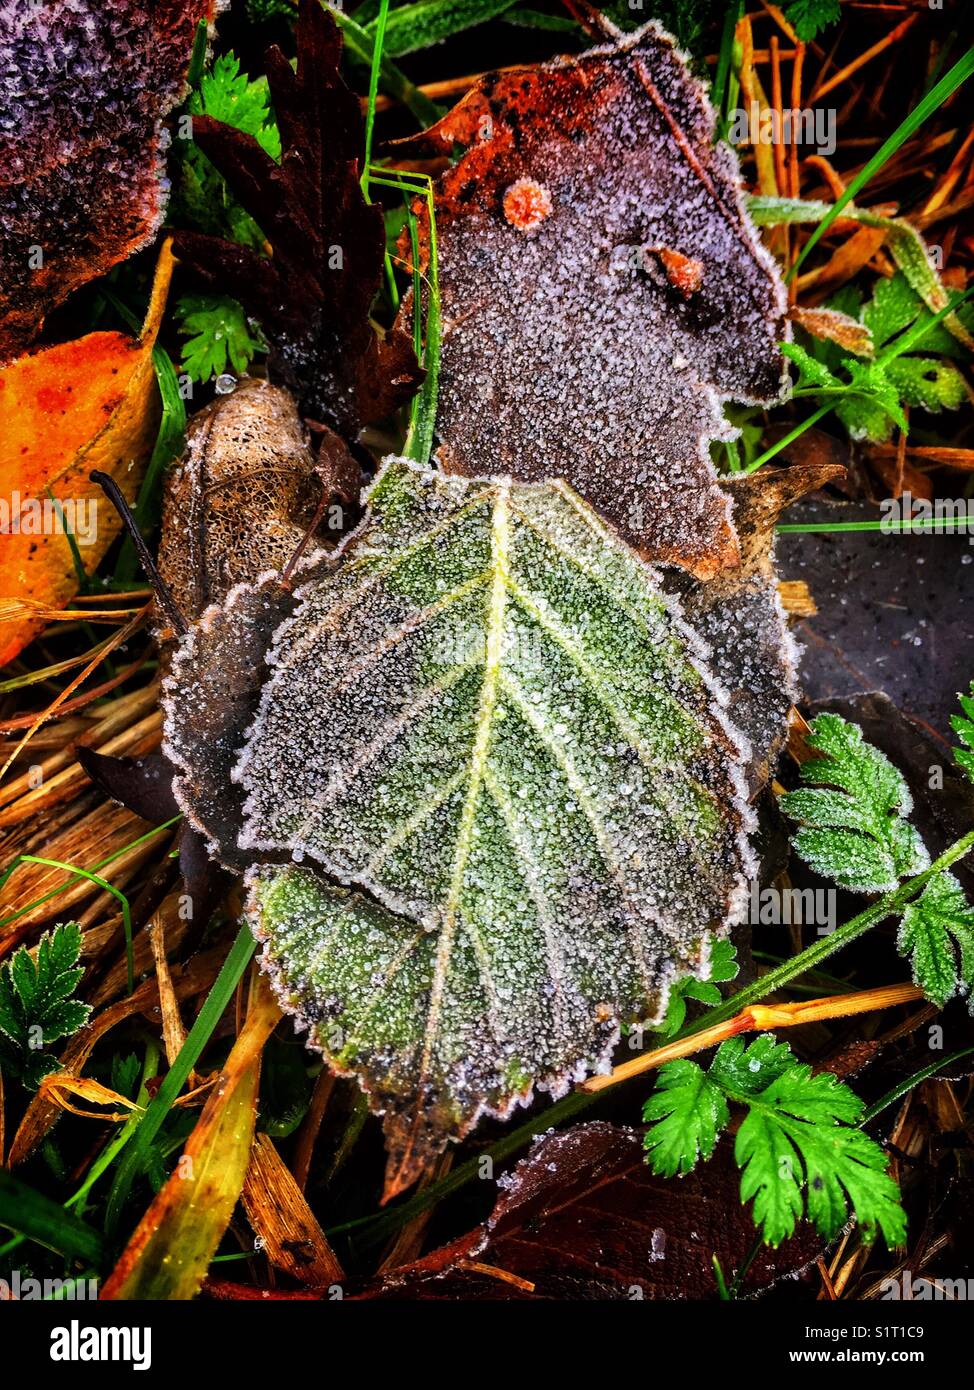 As the leaves have fallen, and showing the colours of autumn. The mornings are starting to show the signs of ground frost. Stock Photo